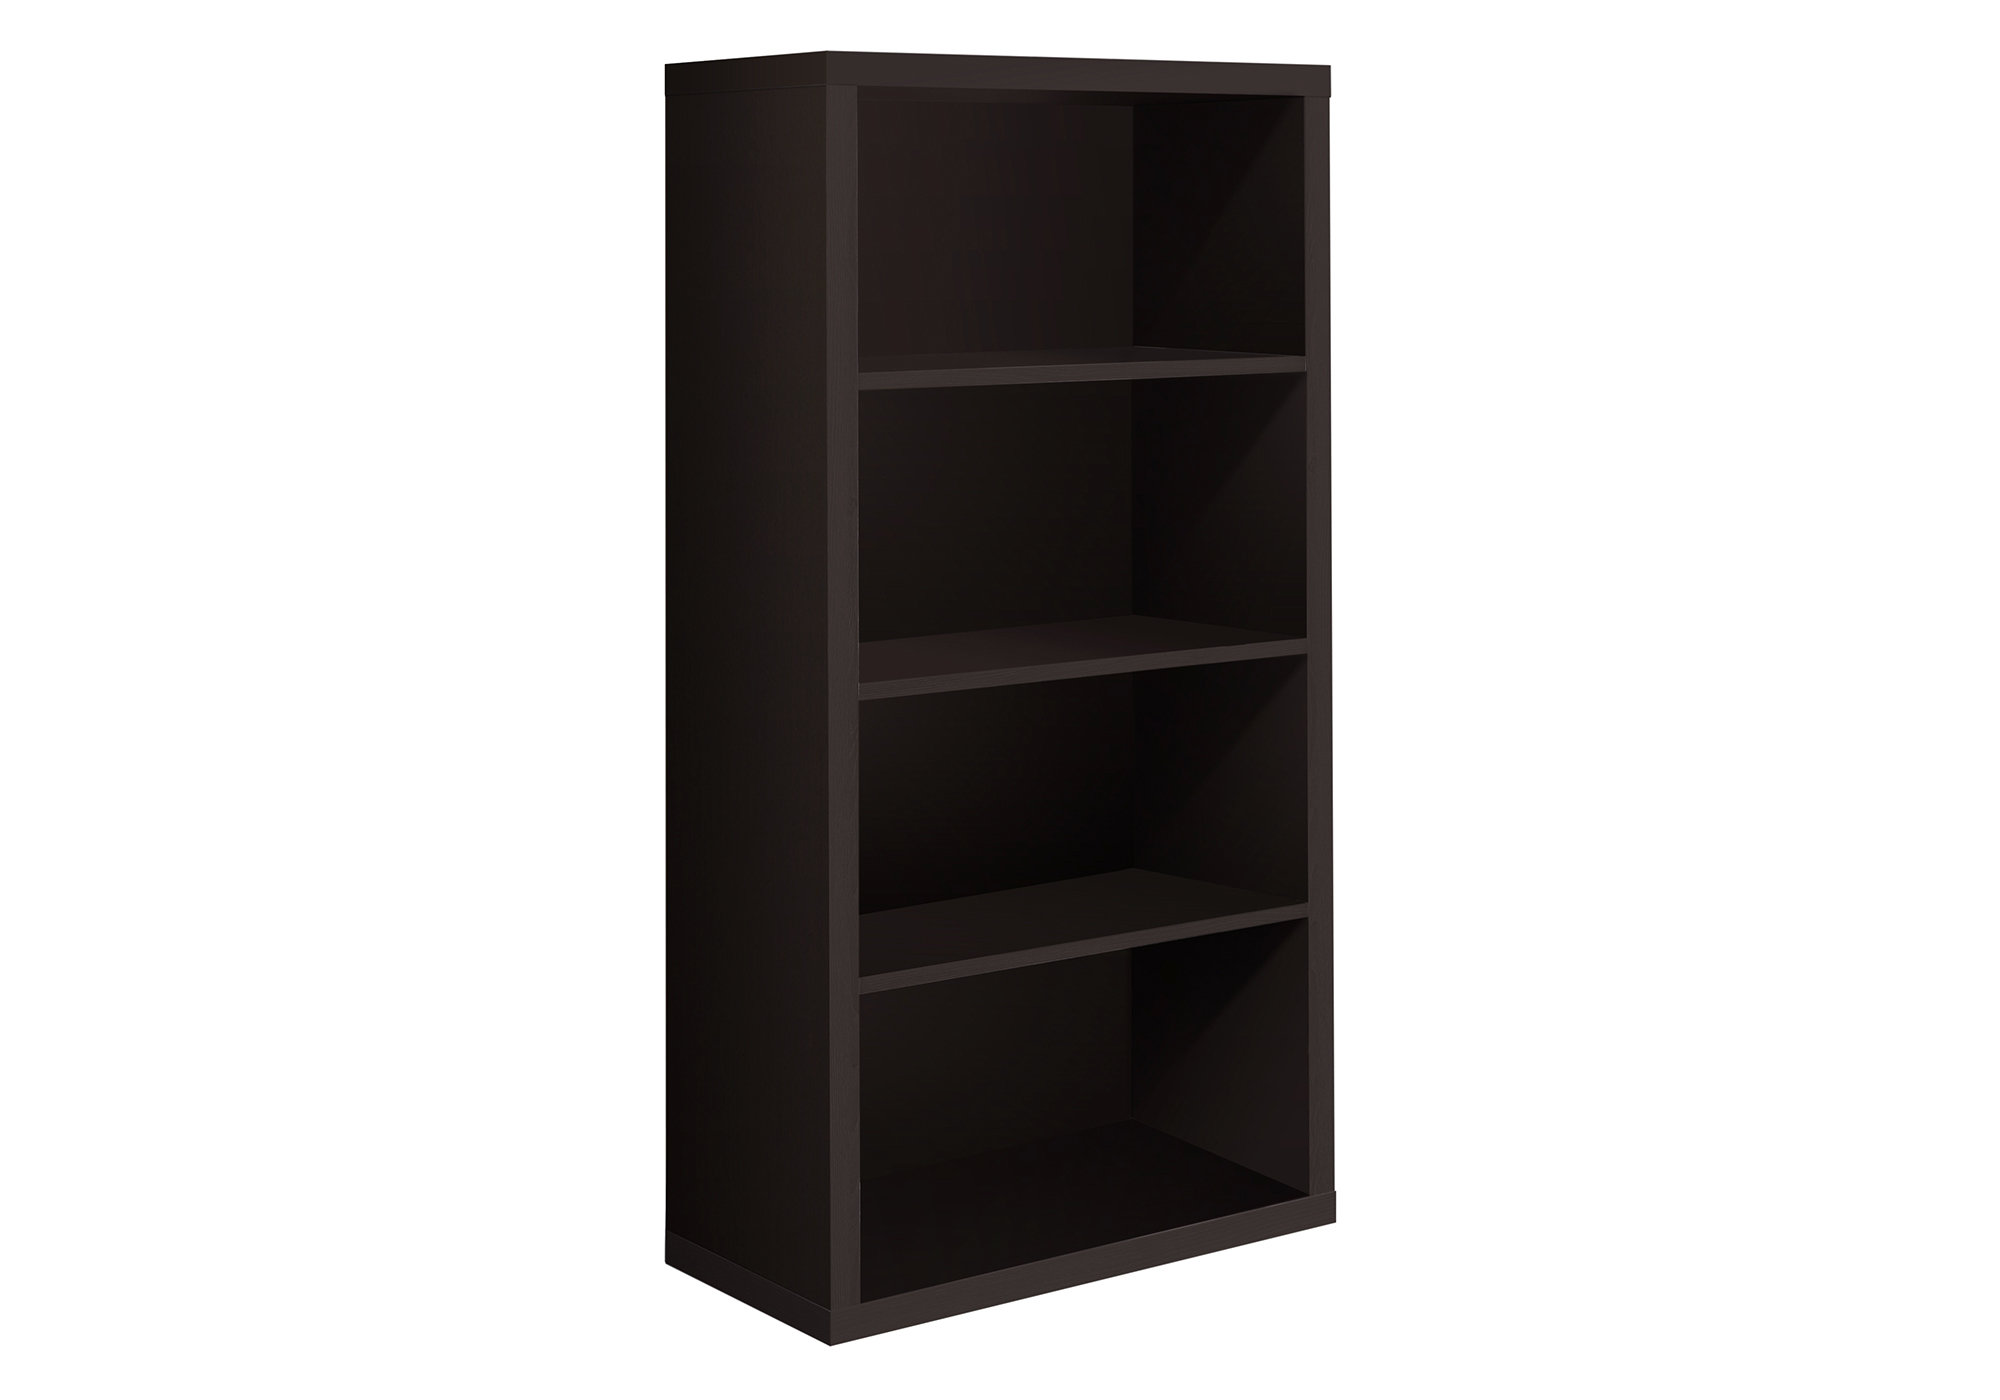 BOOKCASE - 48"H / CAPPUCCINO WITH ADJUSTABLE SHELVES